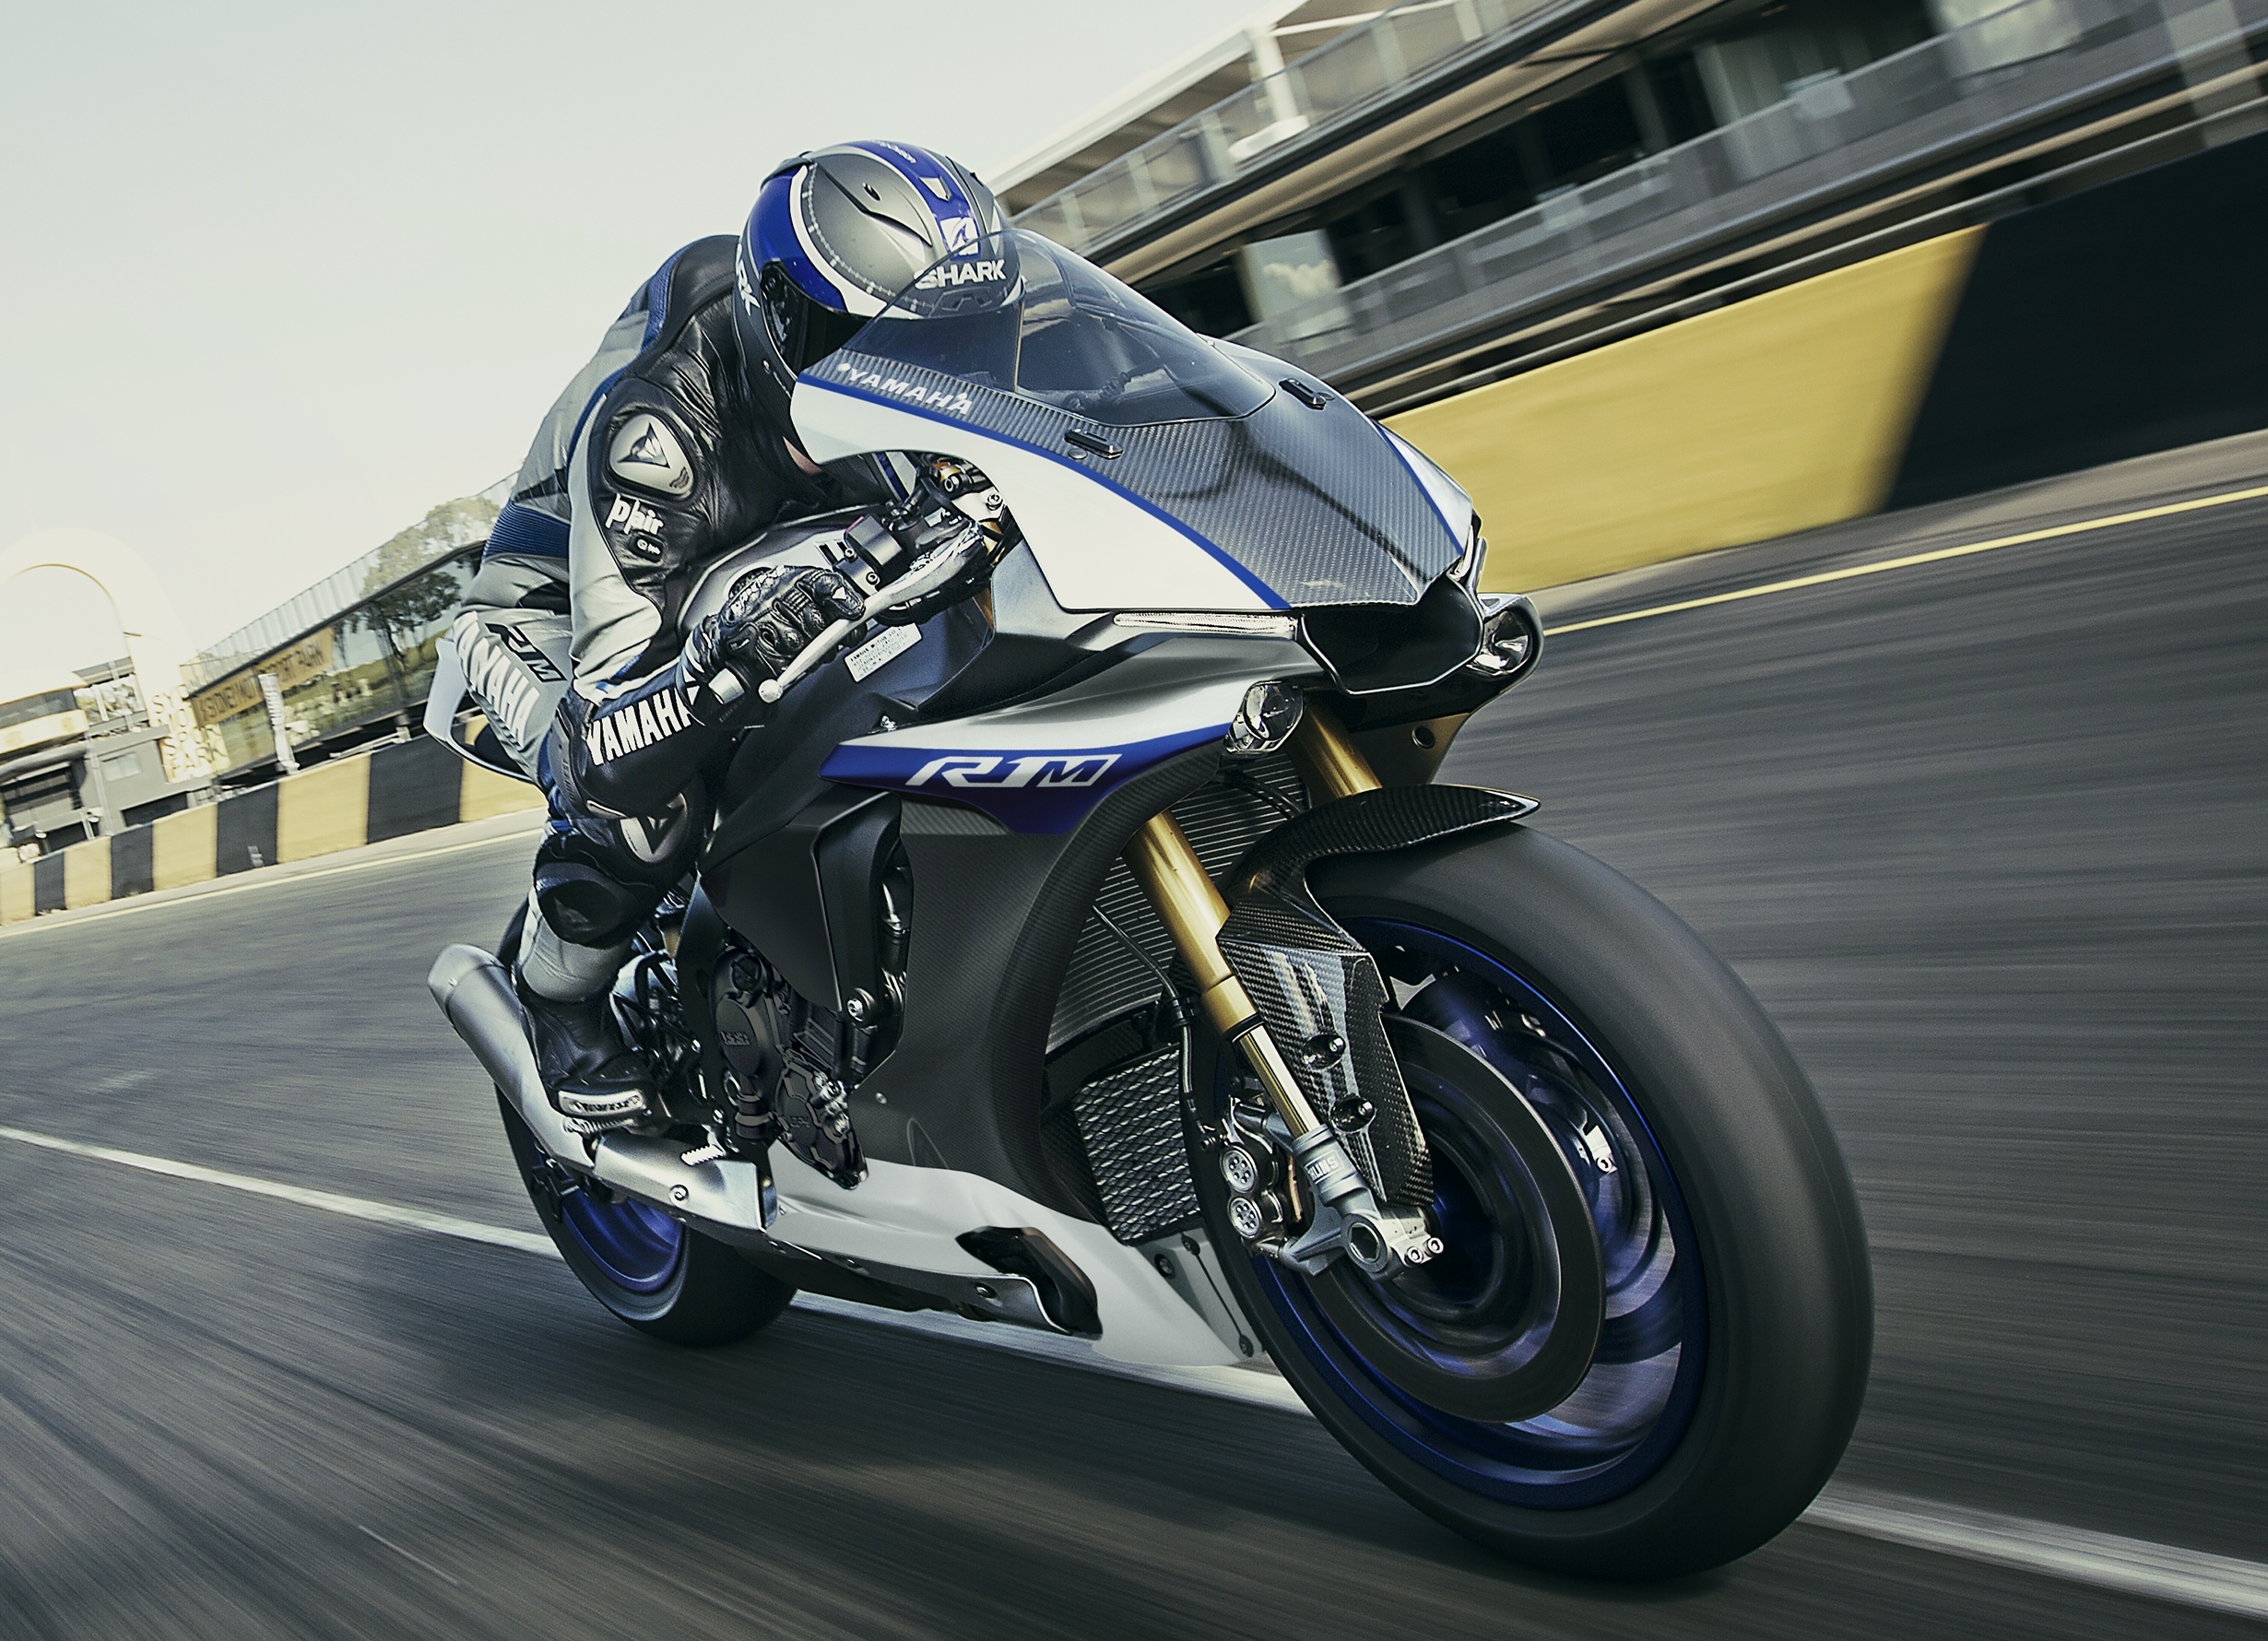 2017 Yamaha YZFR1M opens for online order in Oct